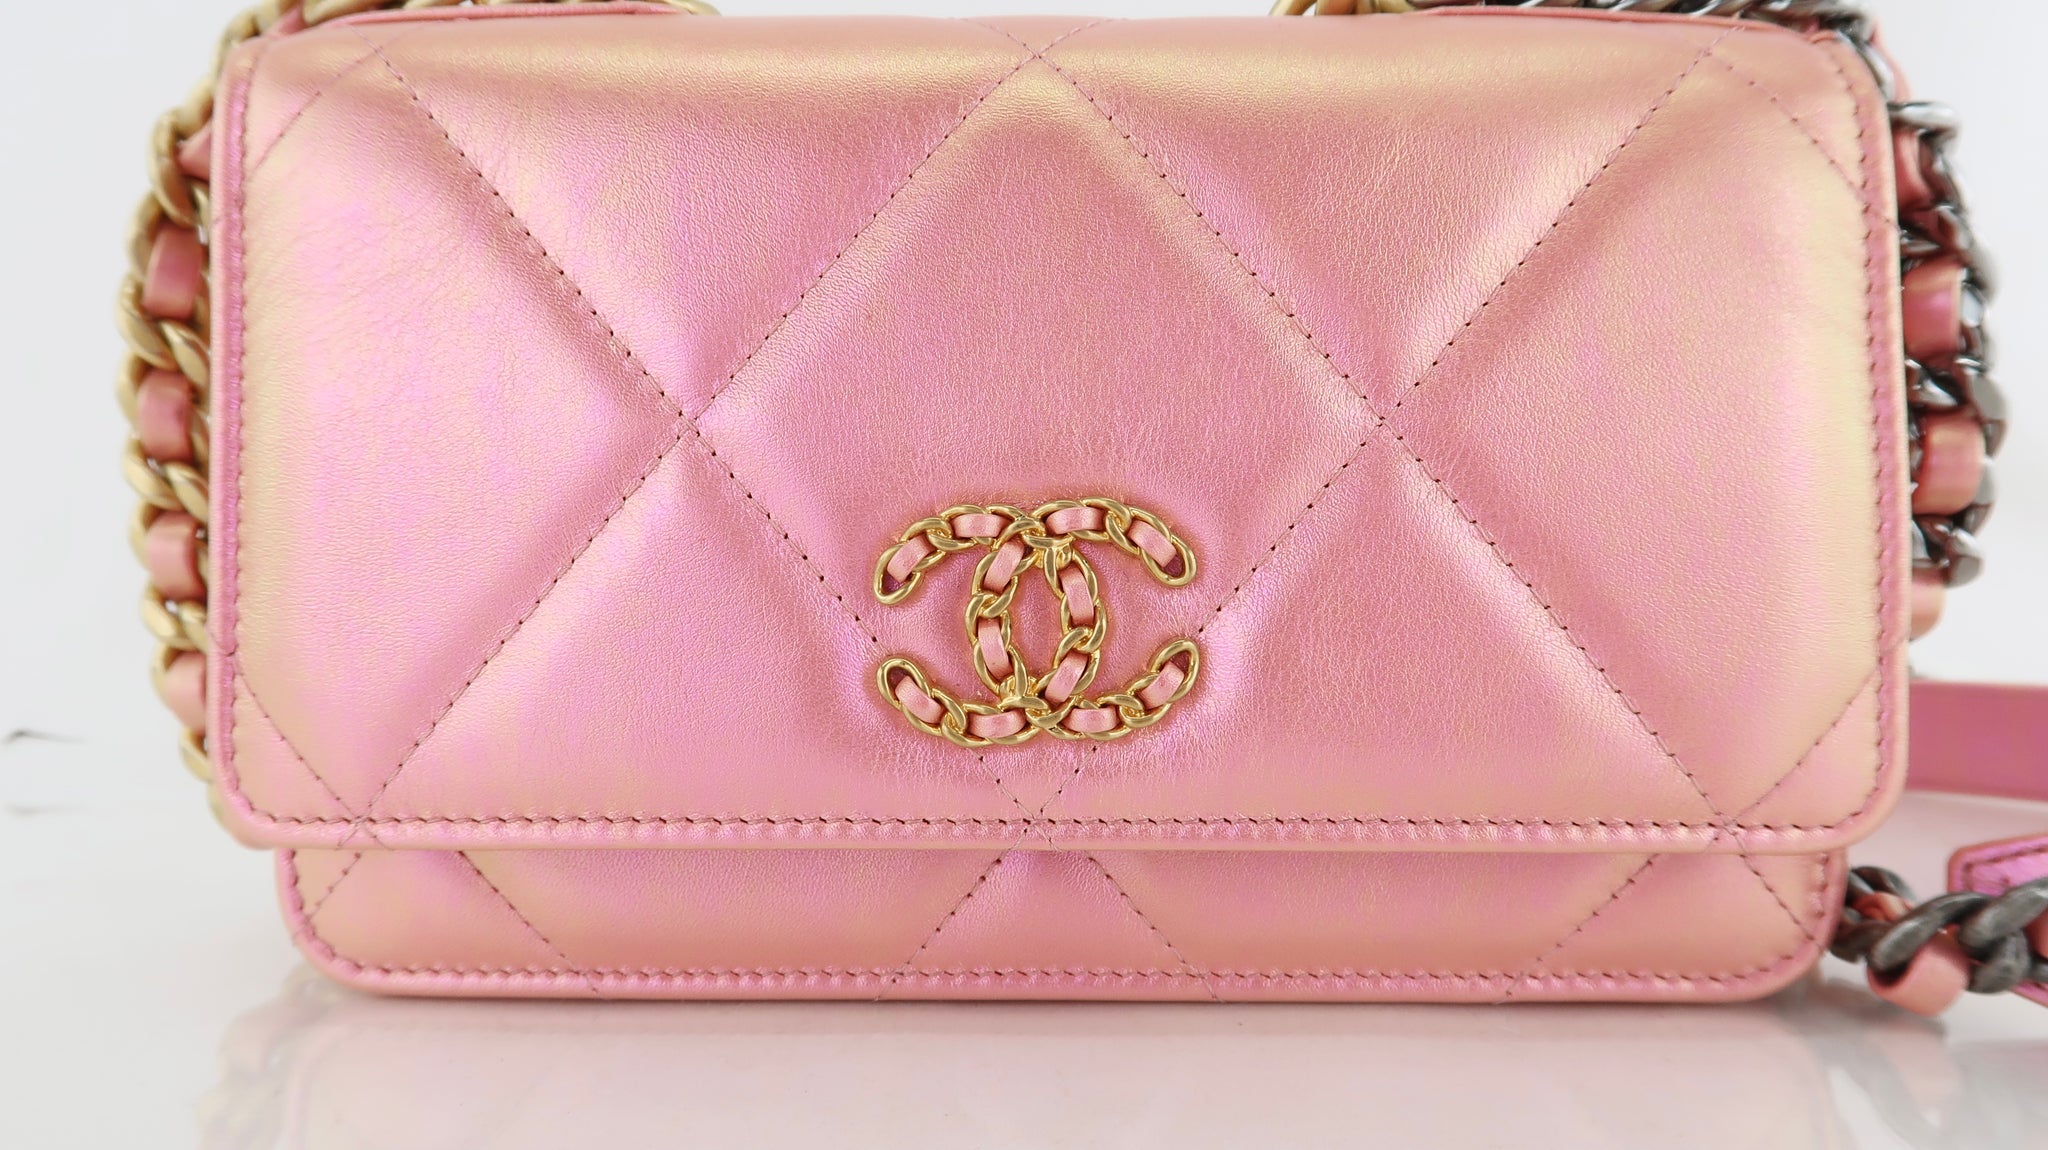 NWT Chanel 19K Pink Iridescent Grained Lambskin Wallet on Chain Flap Bag  Pearl